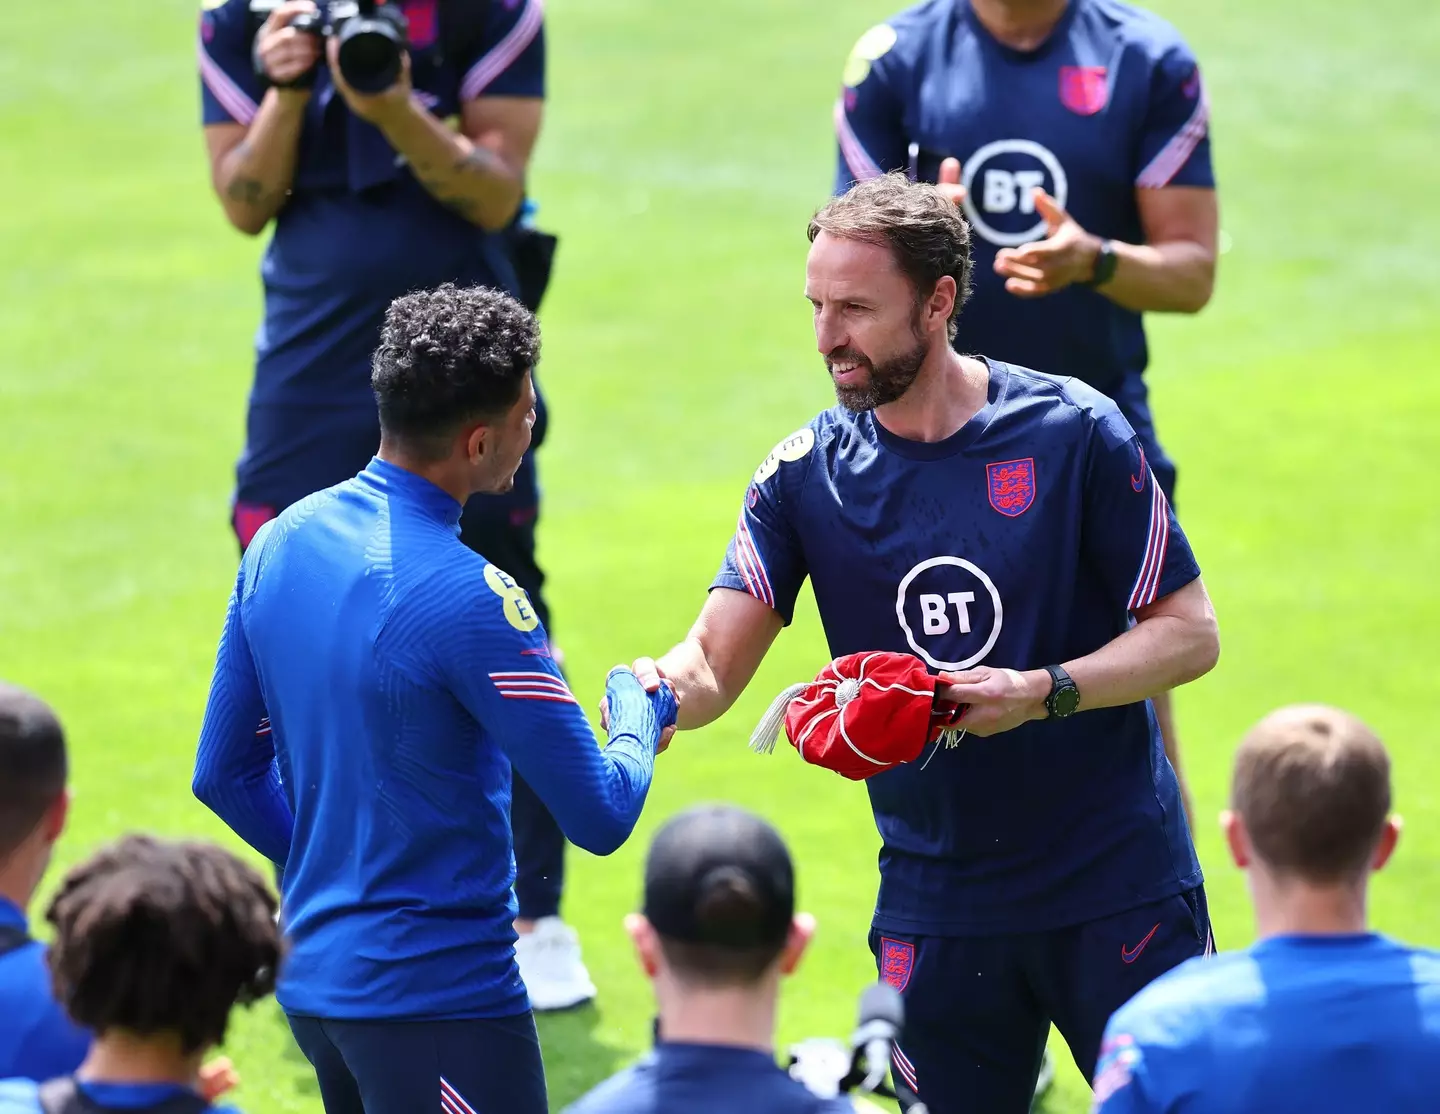 Gareth Southgate manager of England gives out a cap to James Justin during training at FC Bayern Campus, Munich. Image credit: Alamy